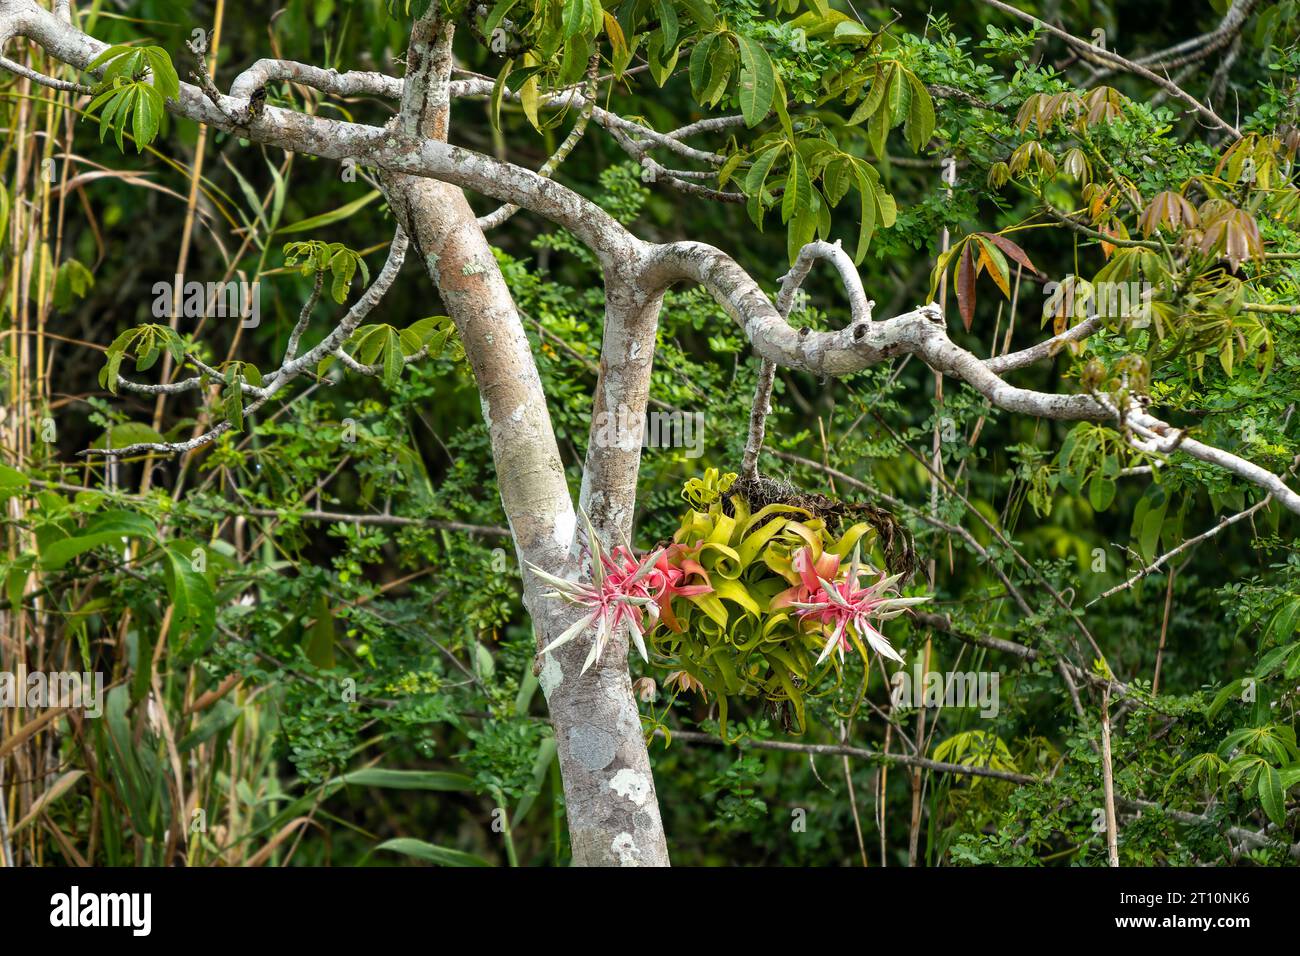 The pink inflorescence & flowers of a Shirley Temple Pant, Tillandsia streptophylla, on a tree by the New River in Belize. Stock Photo